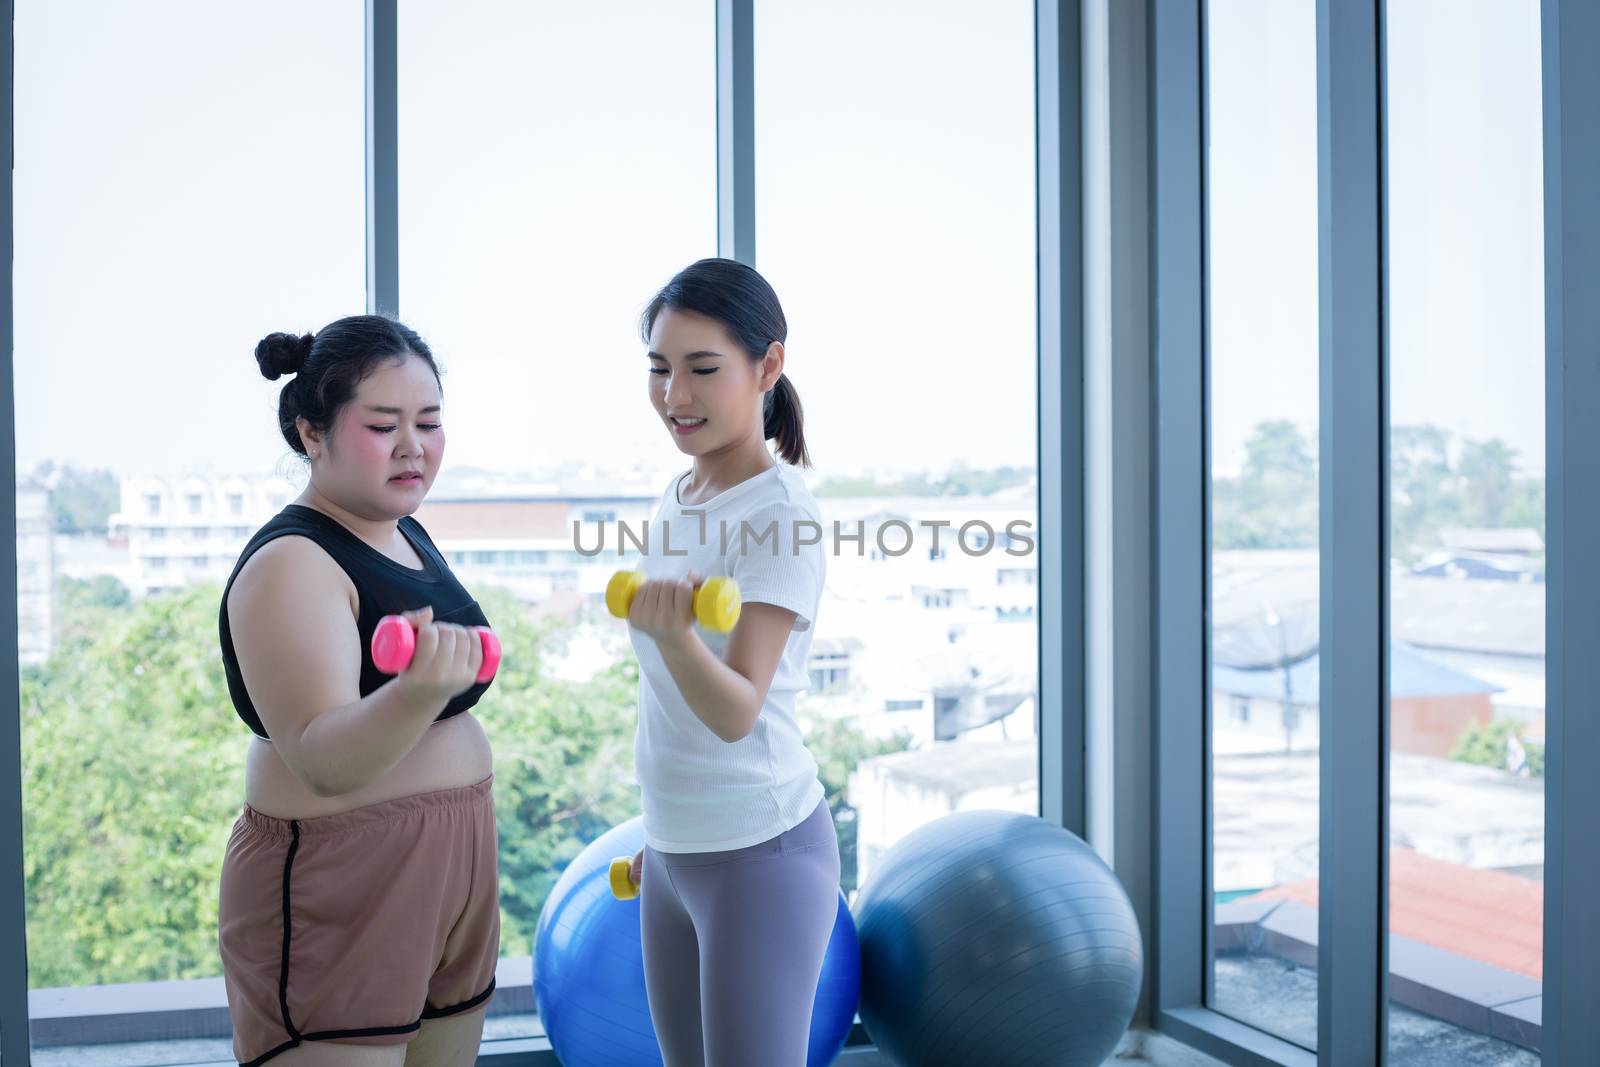 Asian Fat woman and trainer work out in the fitness class and The trainer recommends exercise for weight loss for obese women by Tuiphotoengineer